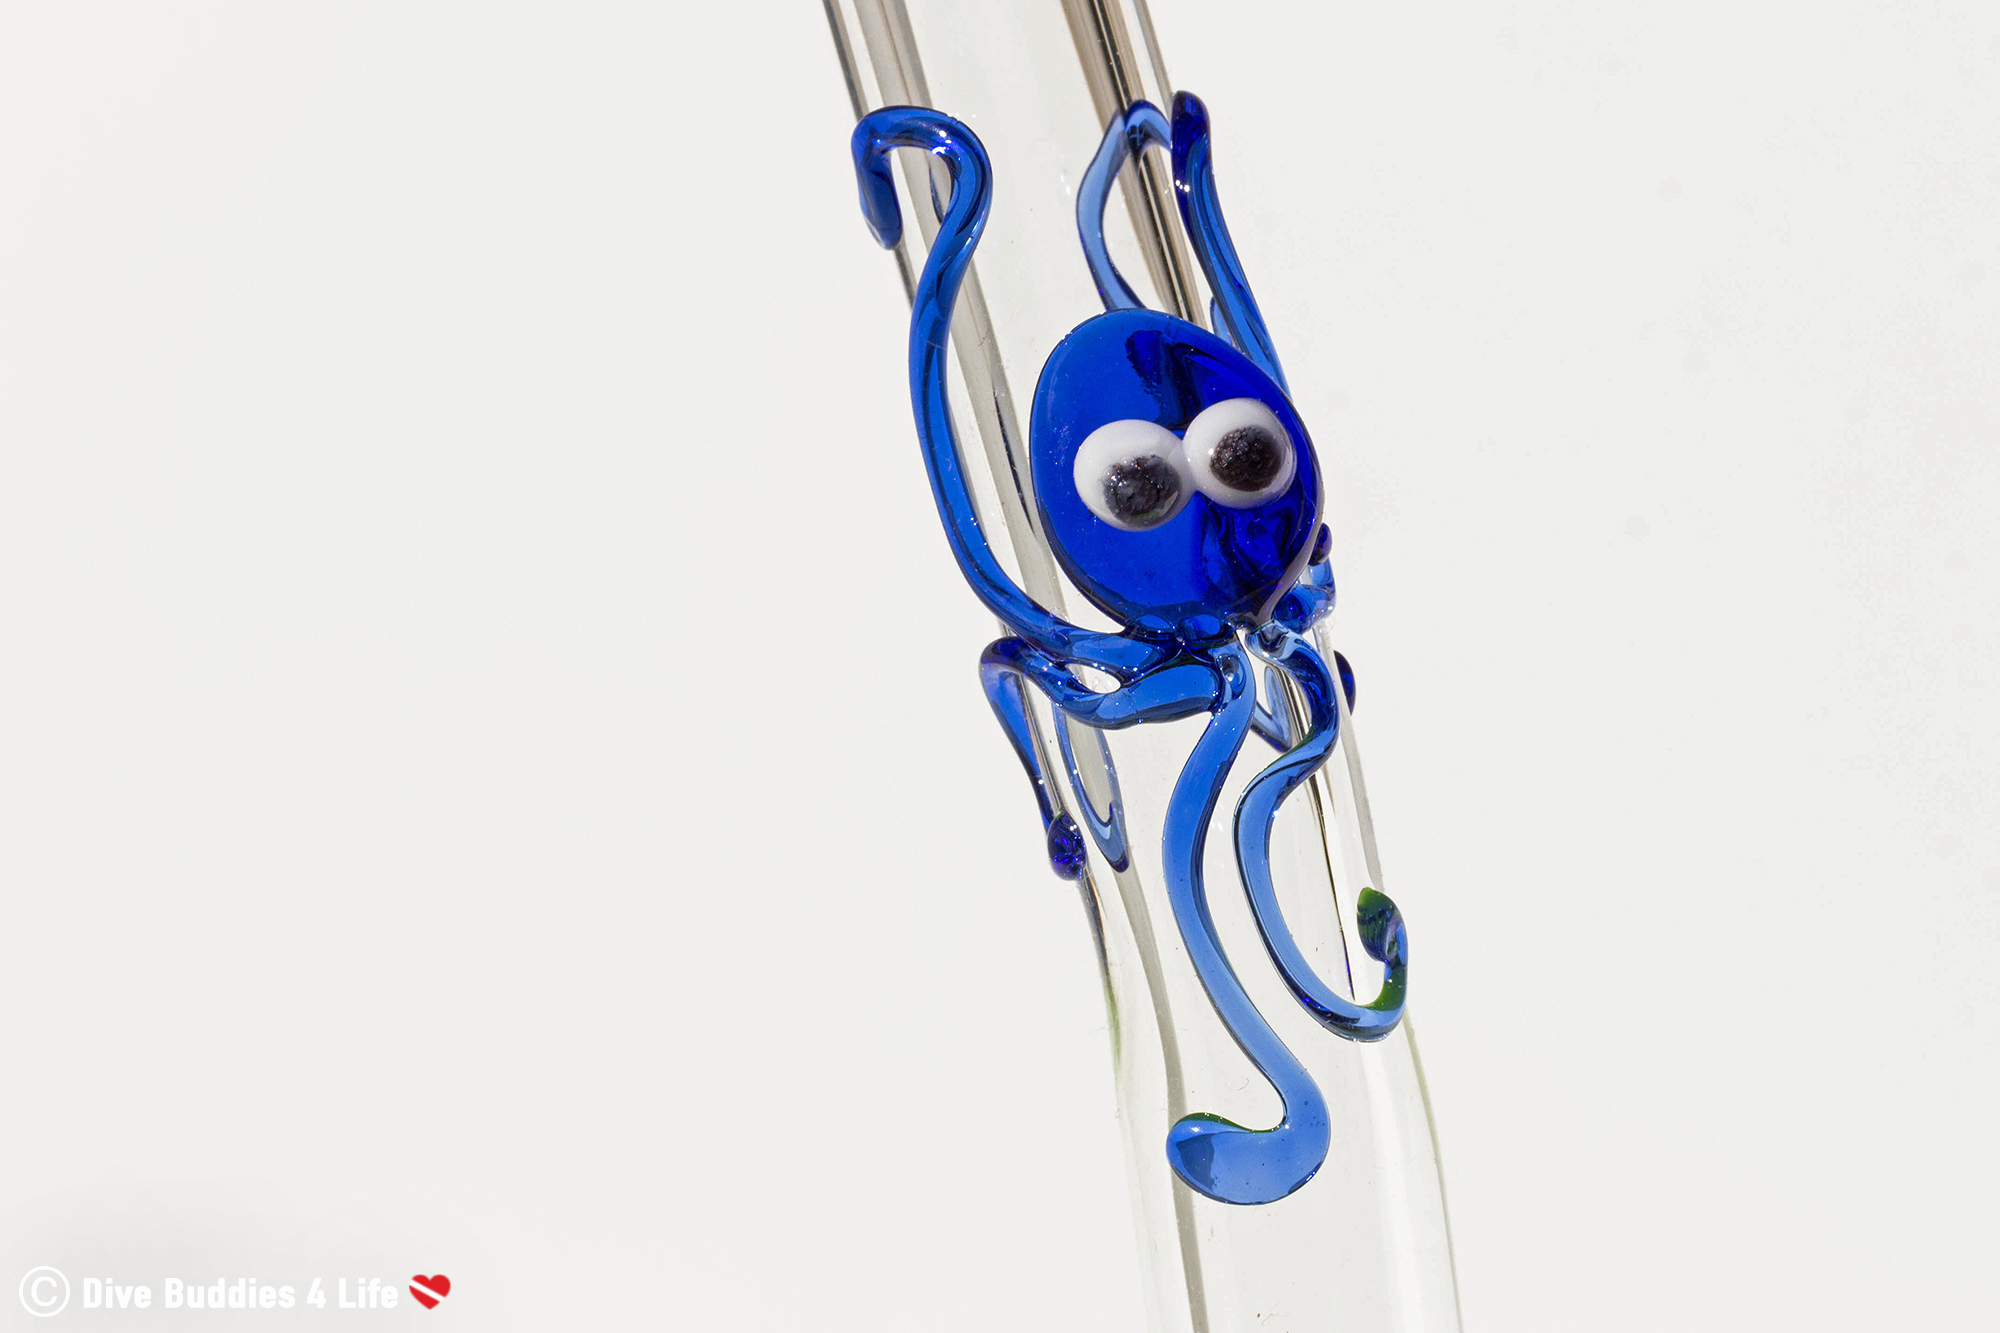 Glass Straw and Glass Octopus at the Tip